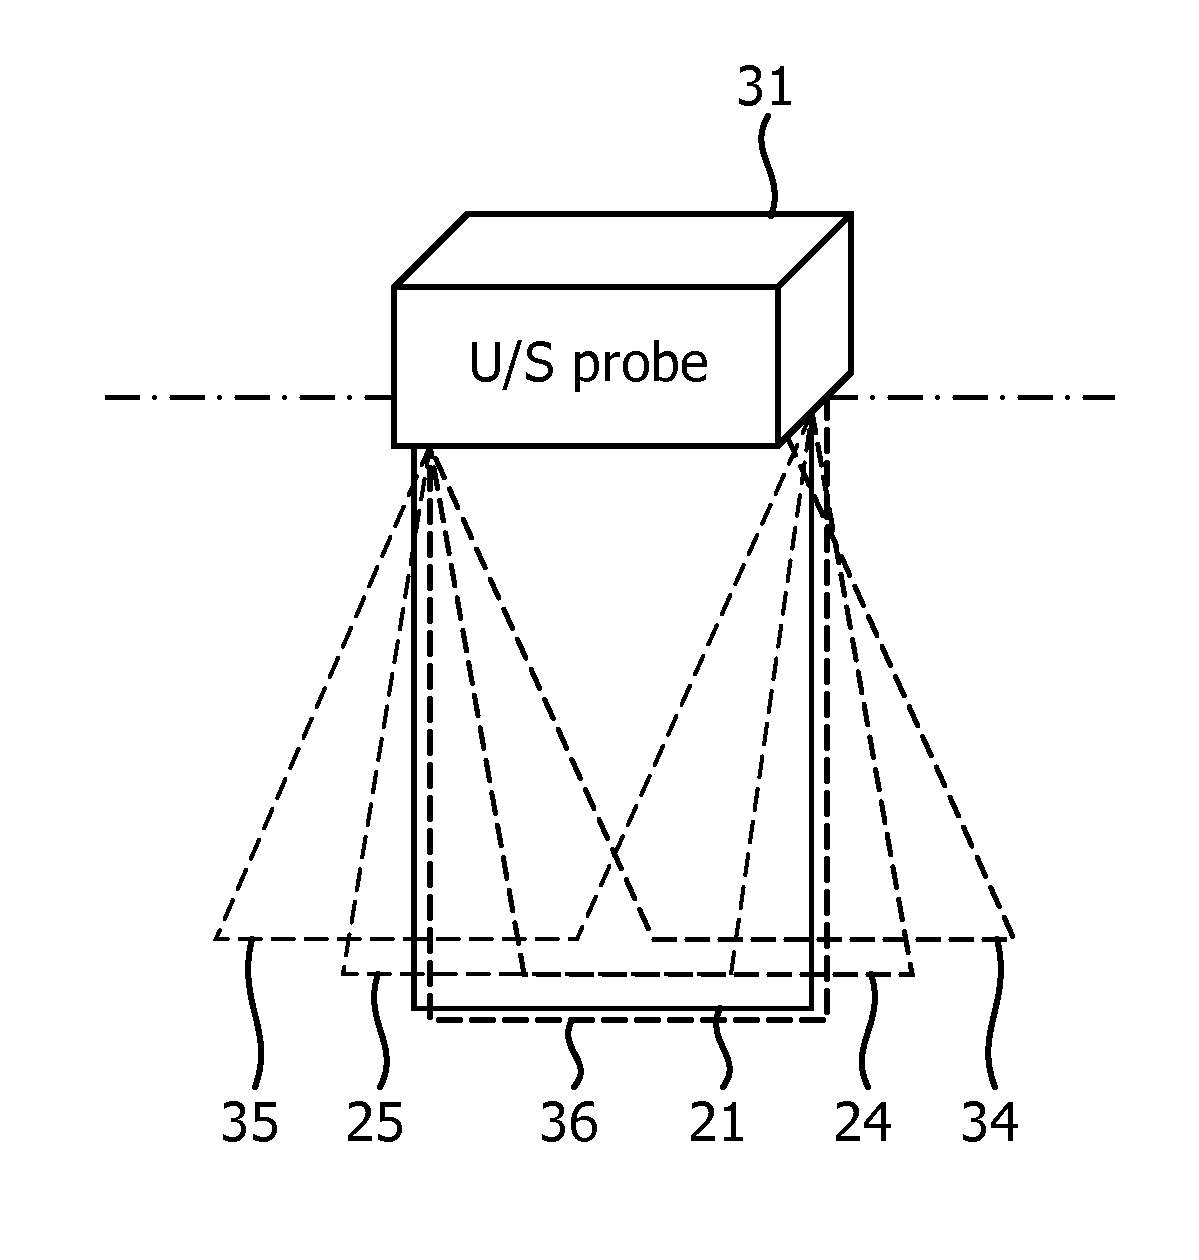 Ultrasonic imaging apparatus and a method for imaging a specular object and a target anatomy in a tissue using ultrasond